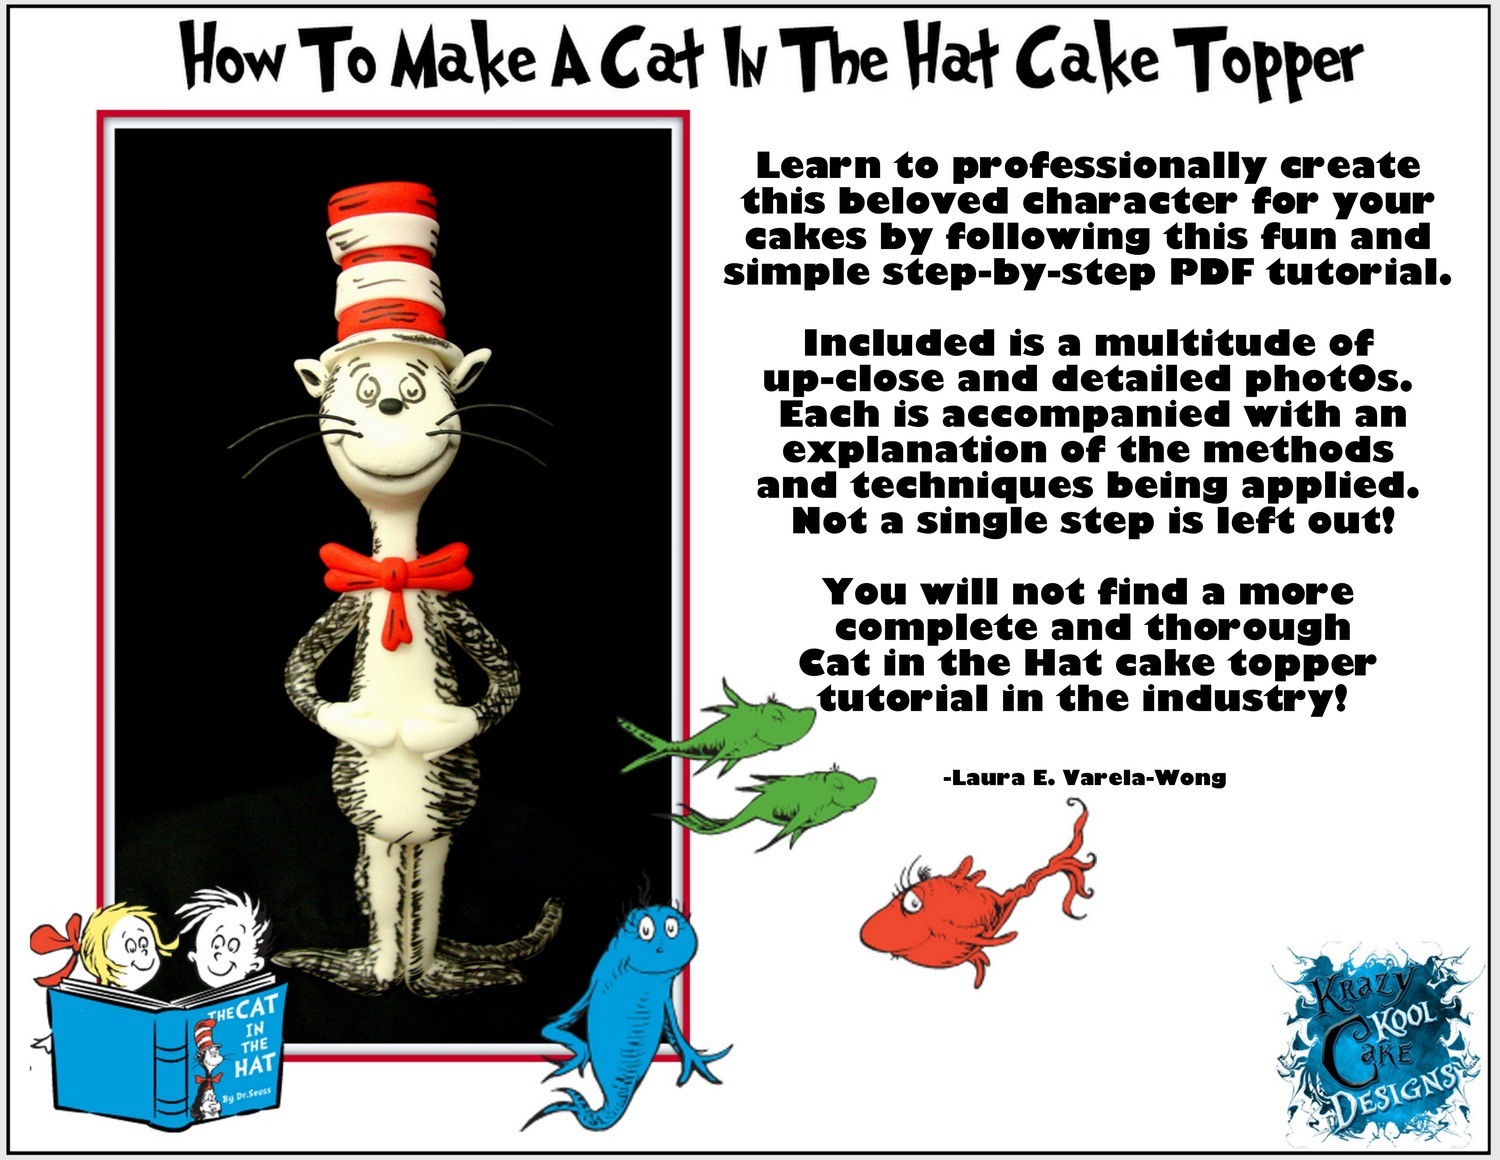 How To Make A Cat In The Hat Cake Topper PDF Tutorial